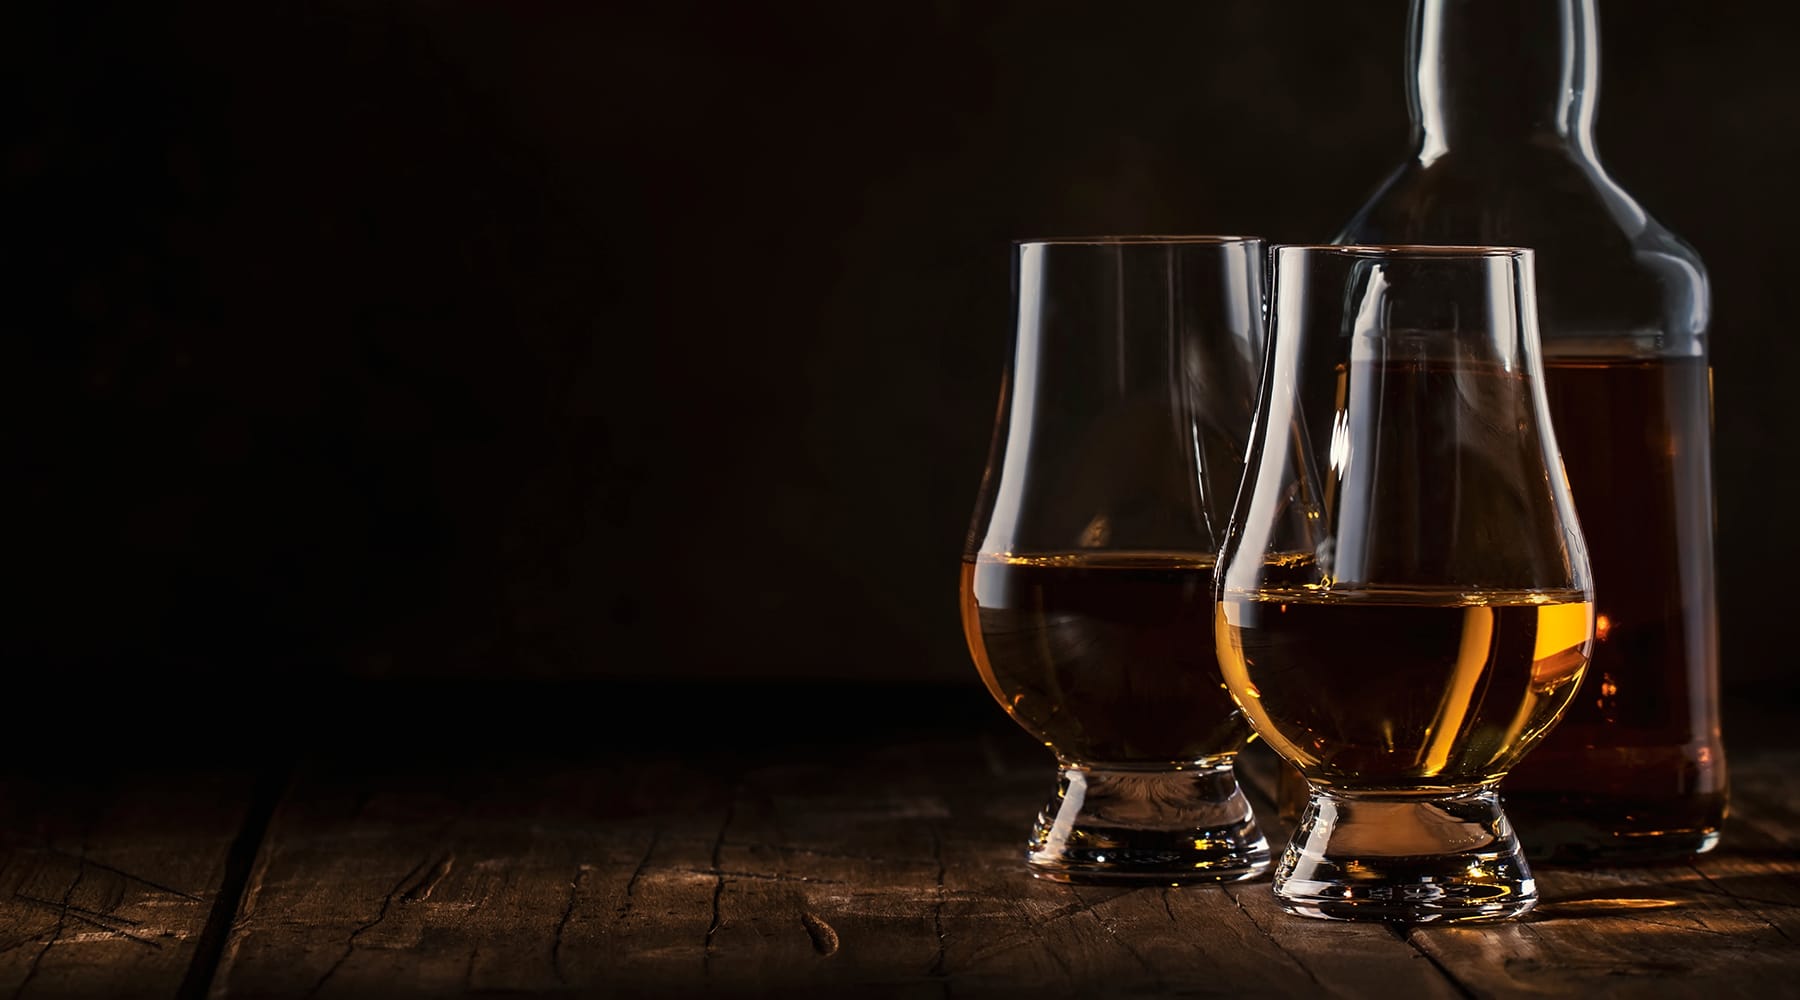 Whisky Drams and Premium Scotch Samples From TopWhiskies